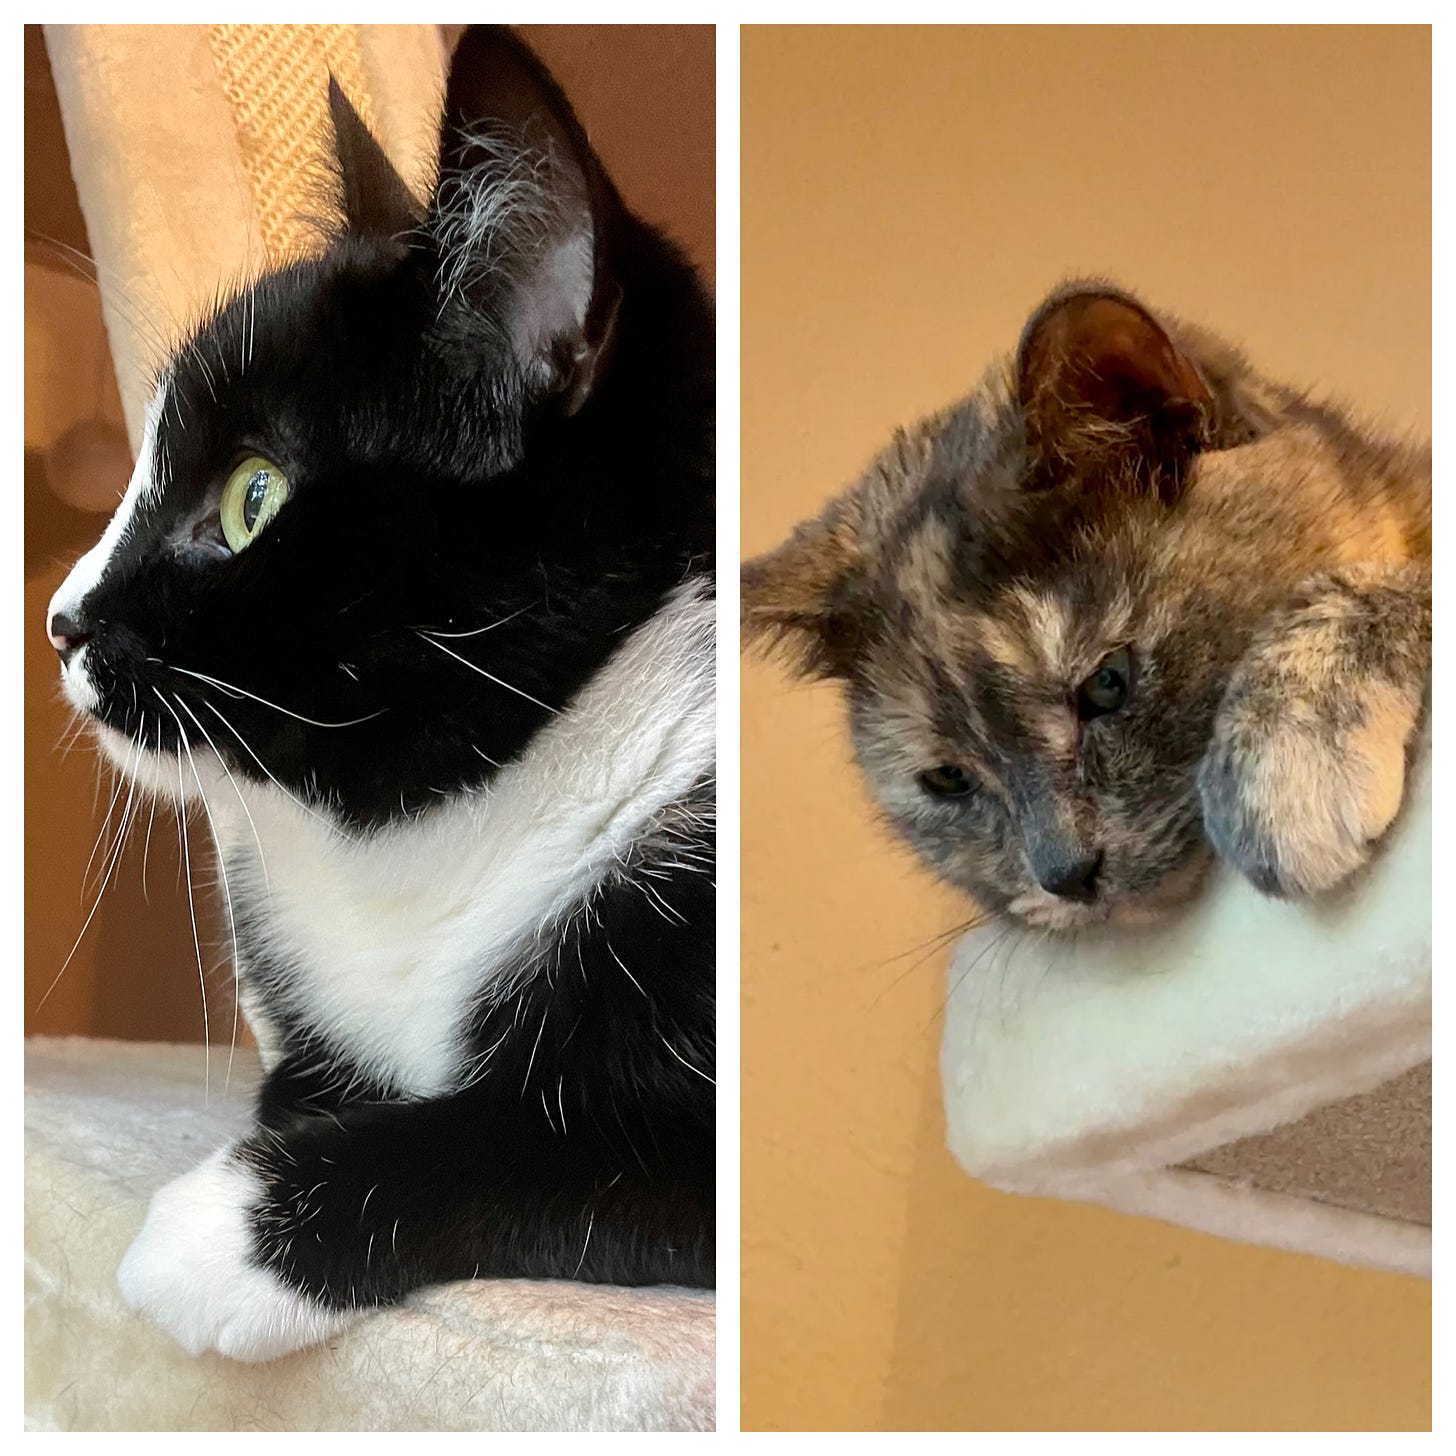 Left: Viewed in profile, a tuxedo cat is looking into the distance with cheerful interest. Right: A dilute tortoiseshell cat is peeking down from her perch atop a beige cat tree. She appears to have murderous intent.